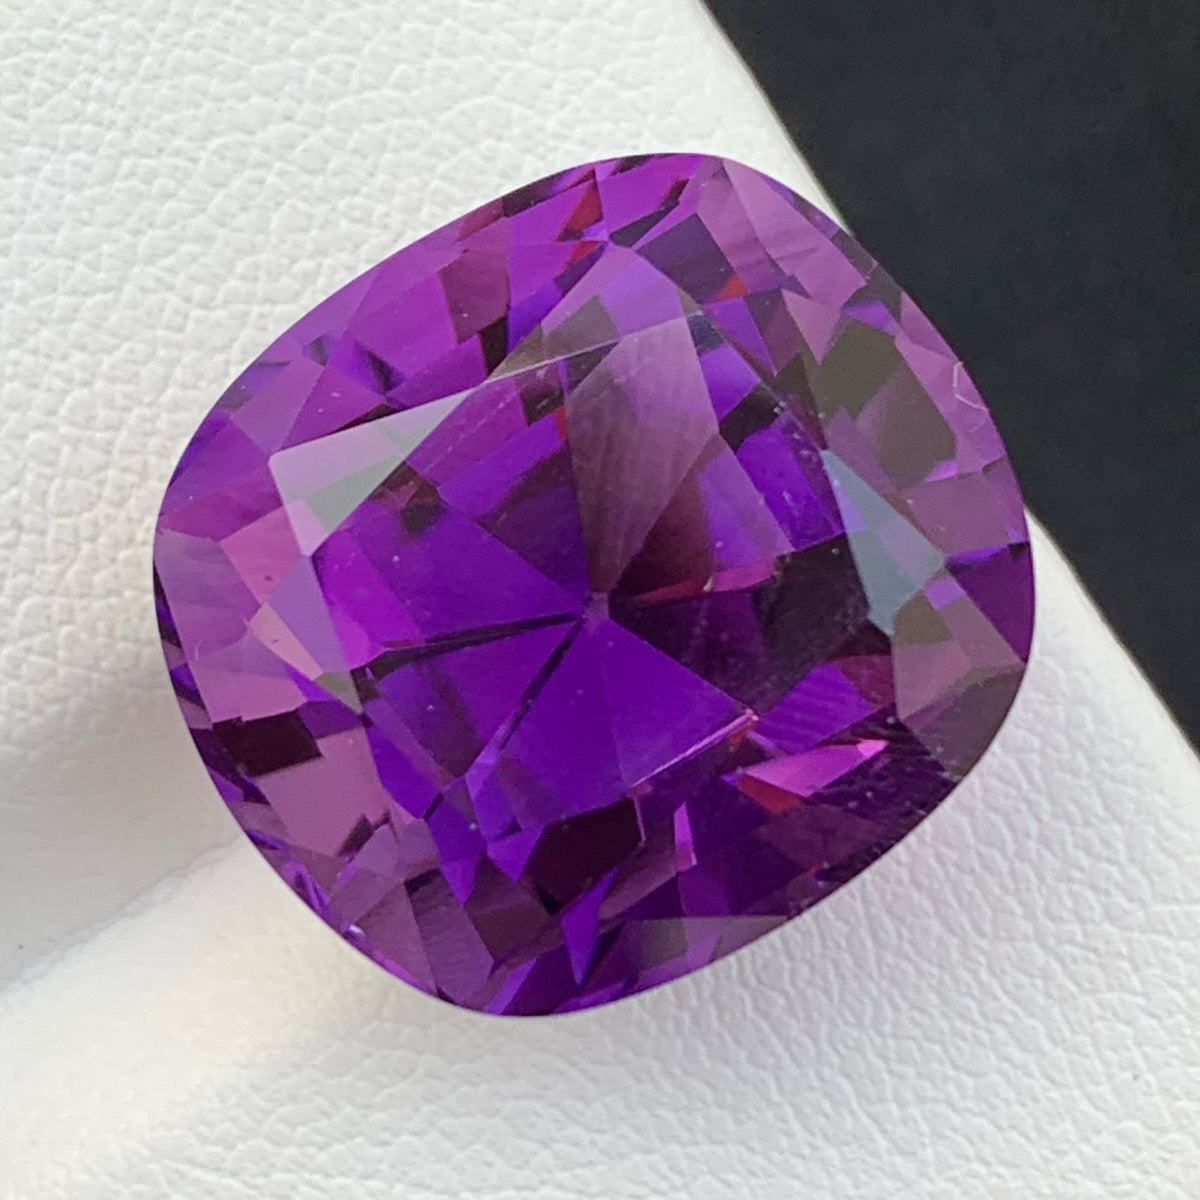 Exquisite Natural Loose Amethyst Stone